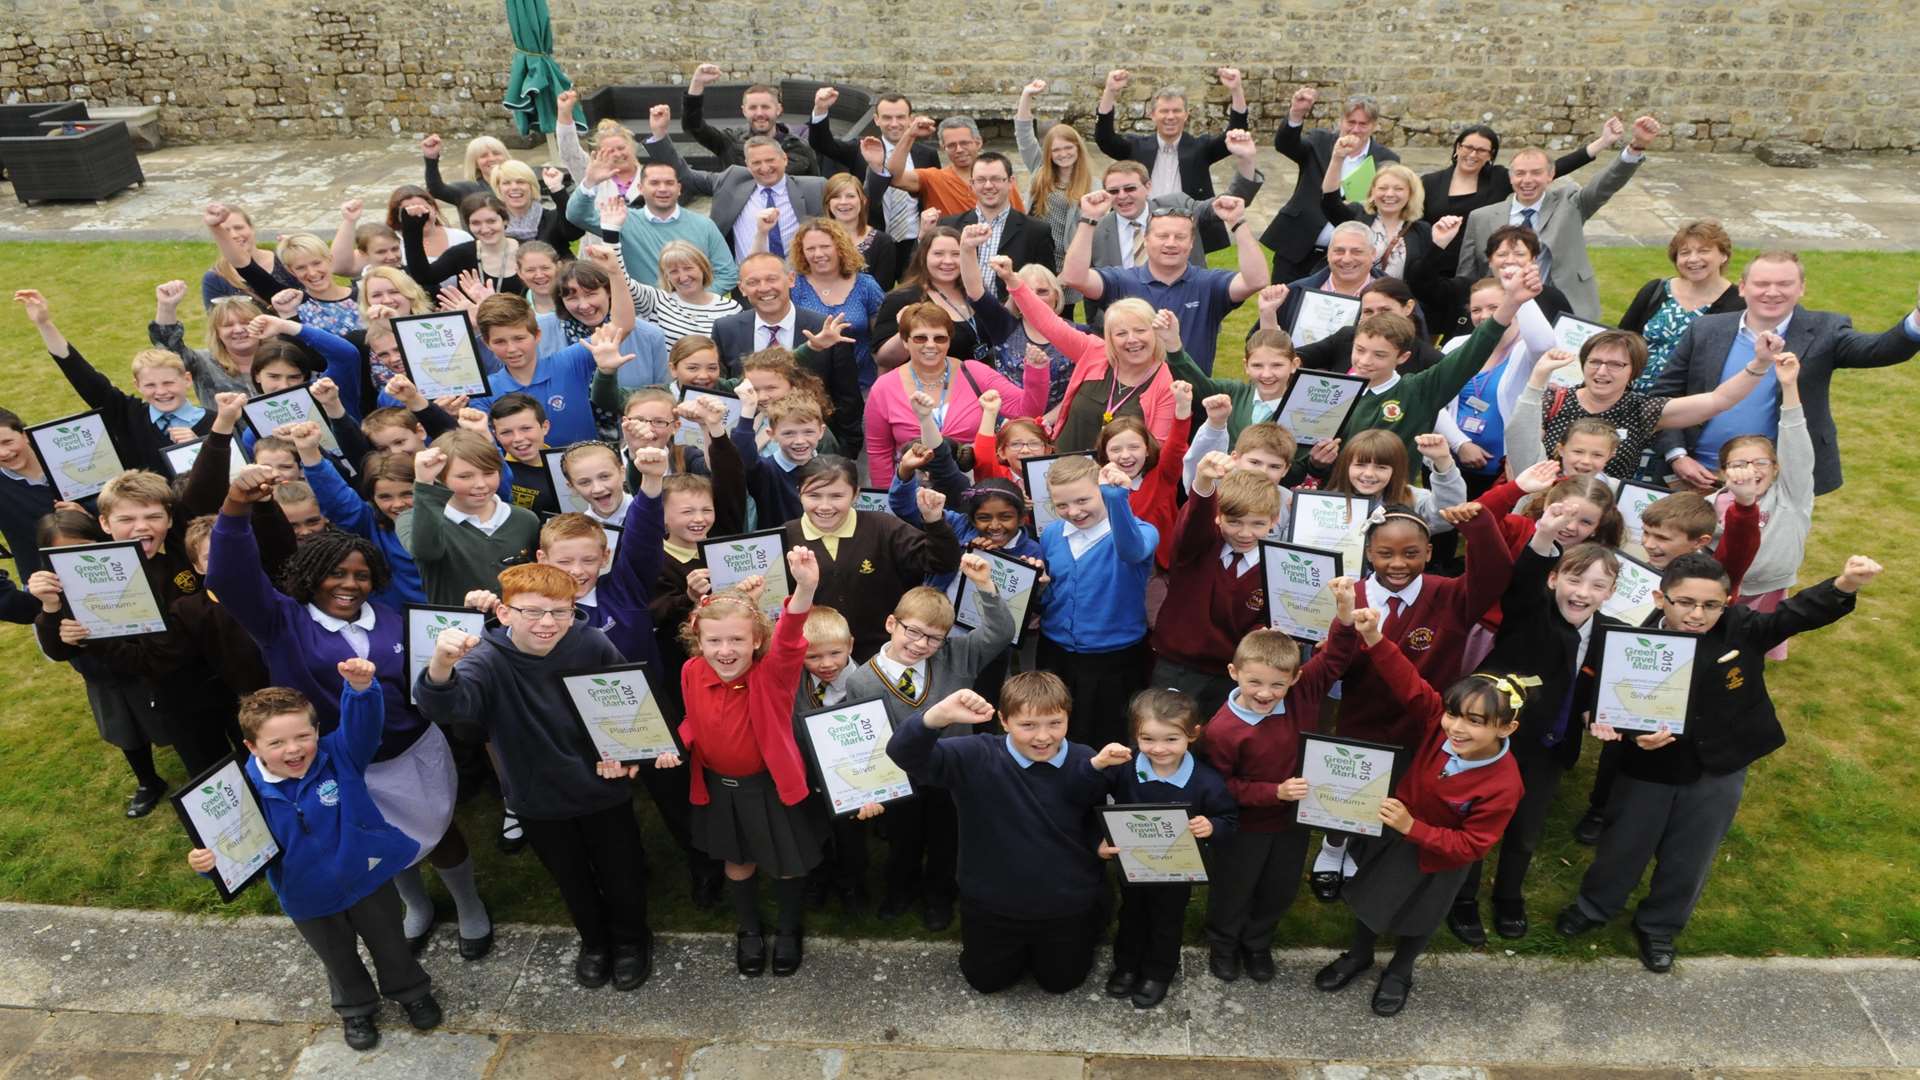 Schools leading the way in green travel received Green Travel Mark Awards at Leeds Castle, congratulated by supporters from Kent County Council, Medway Council, Three R’s Teacher Recruitment, Mini Babybel, Countrystyle Recycling and Southern Water.